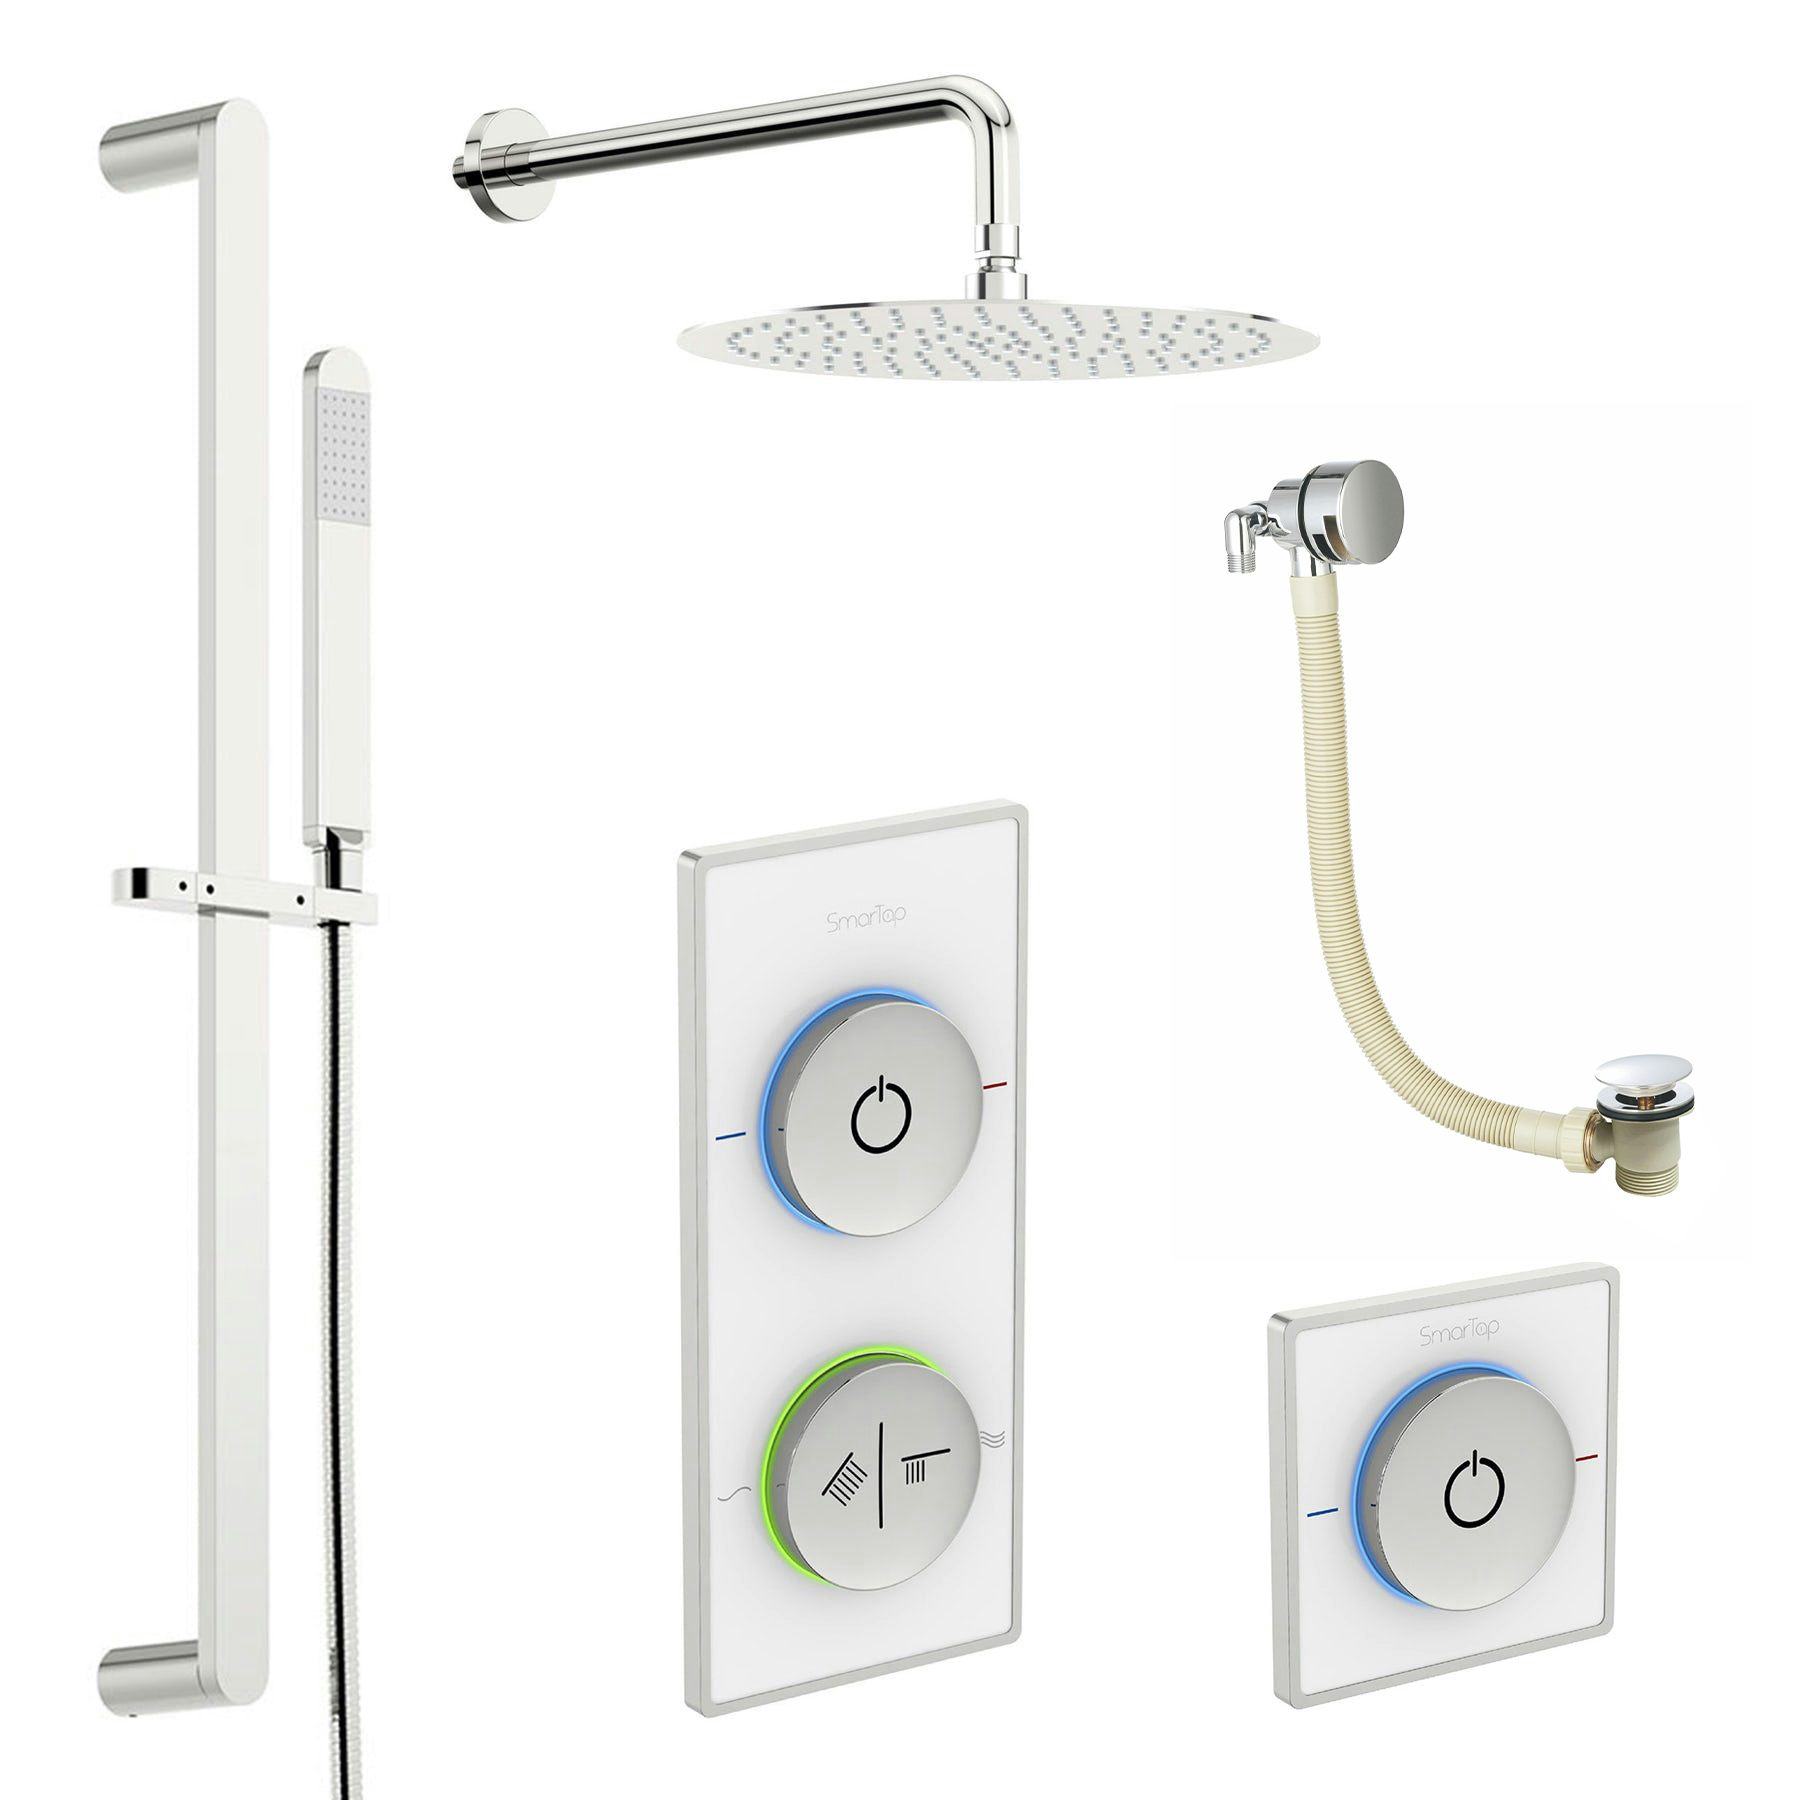 SmarTap white smart shower system with complete round wall shower bath set